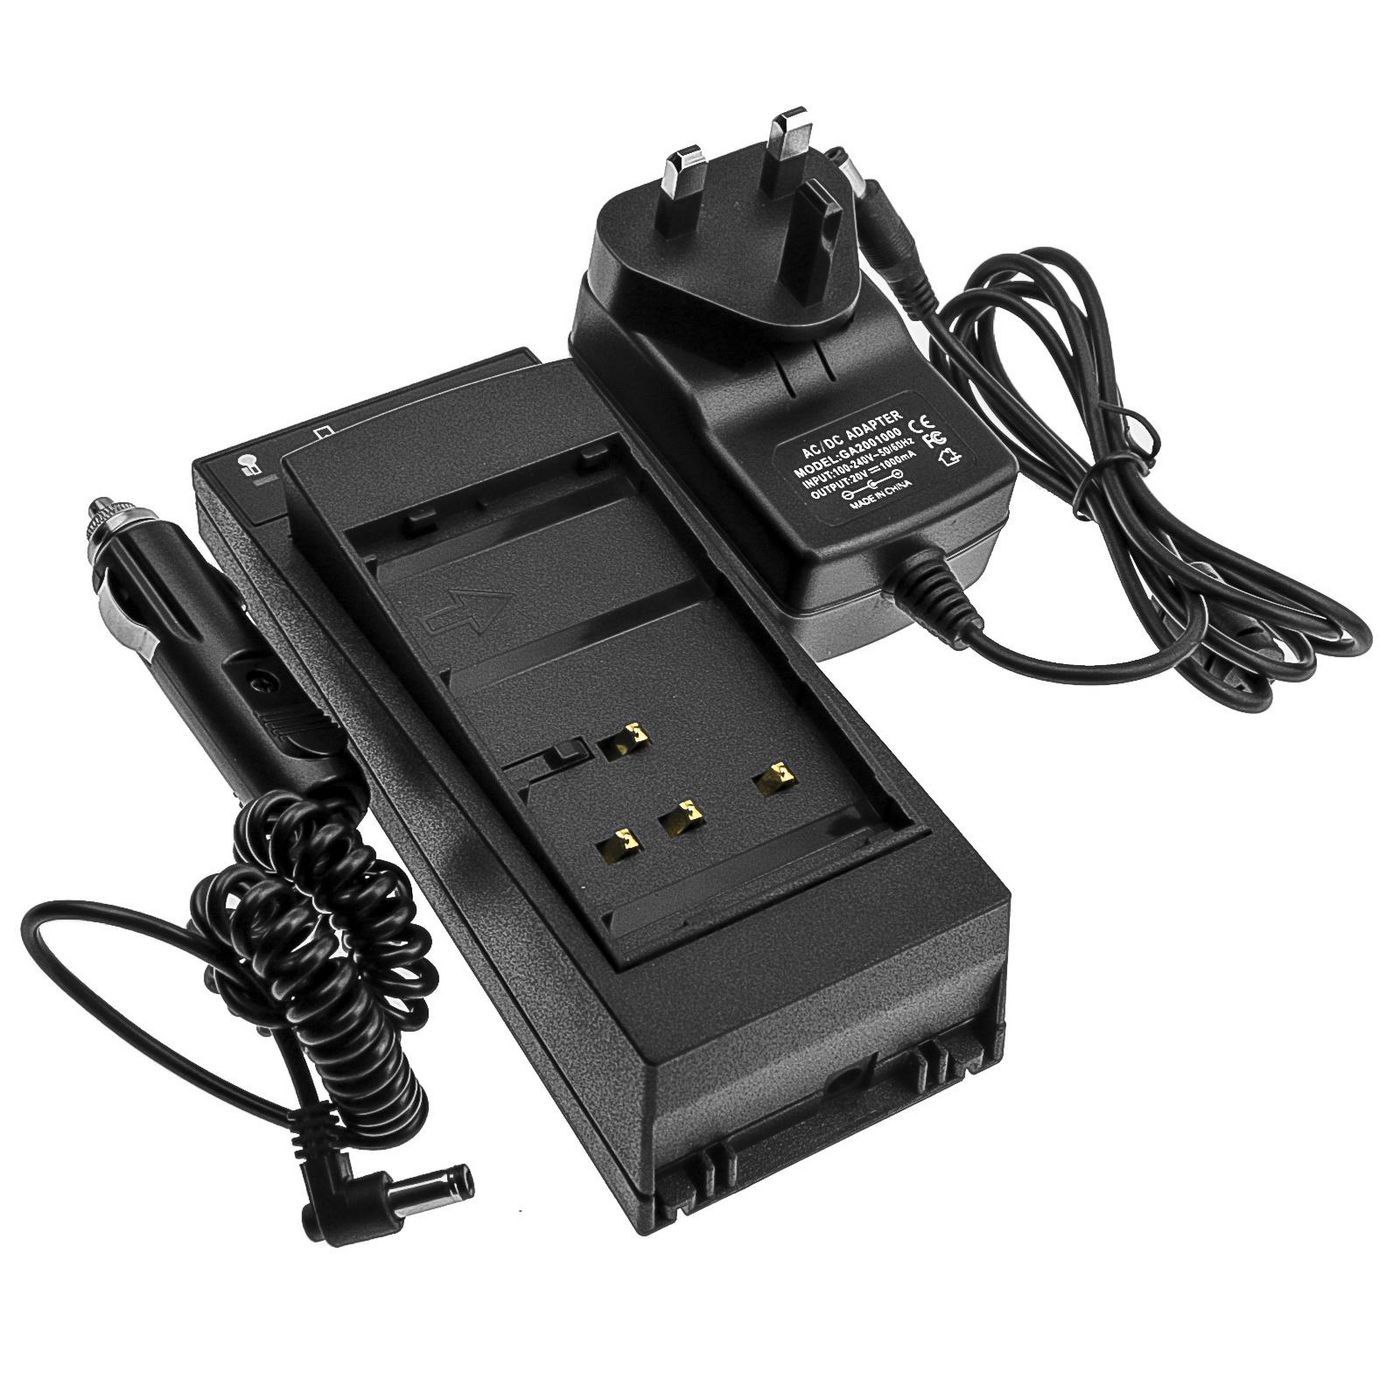 Charger for Leica, Geomax